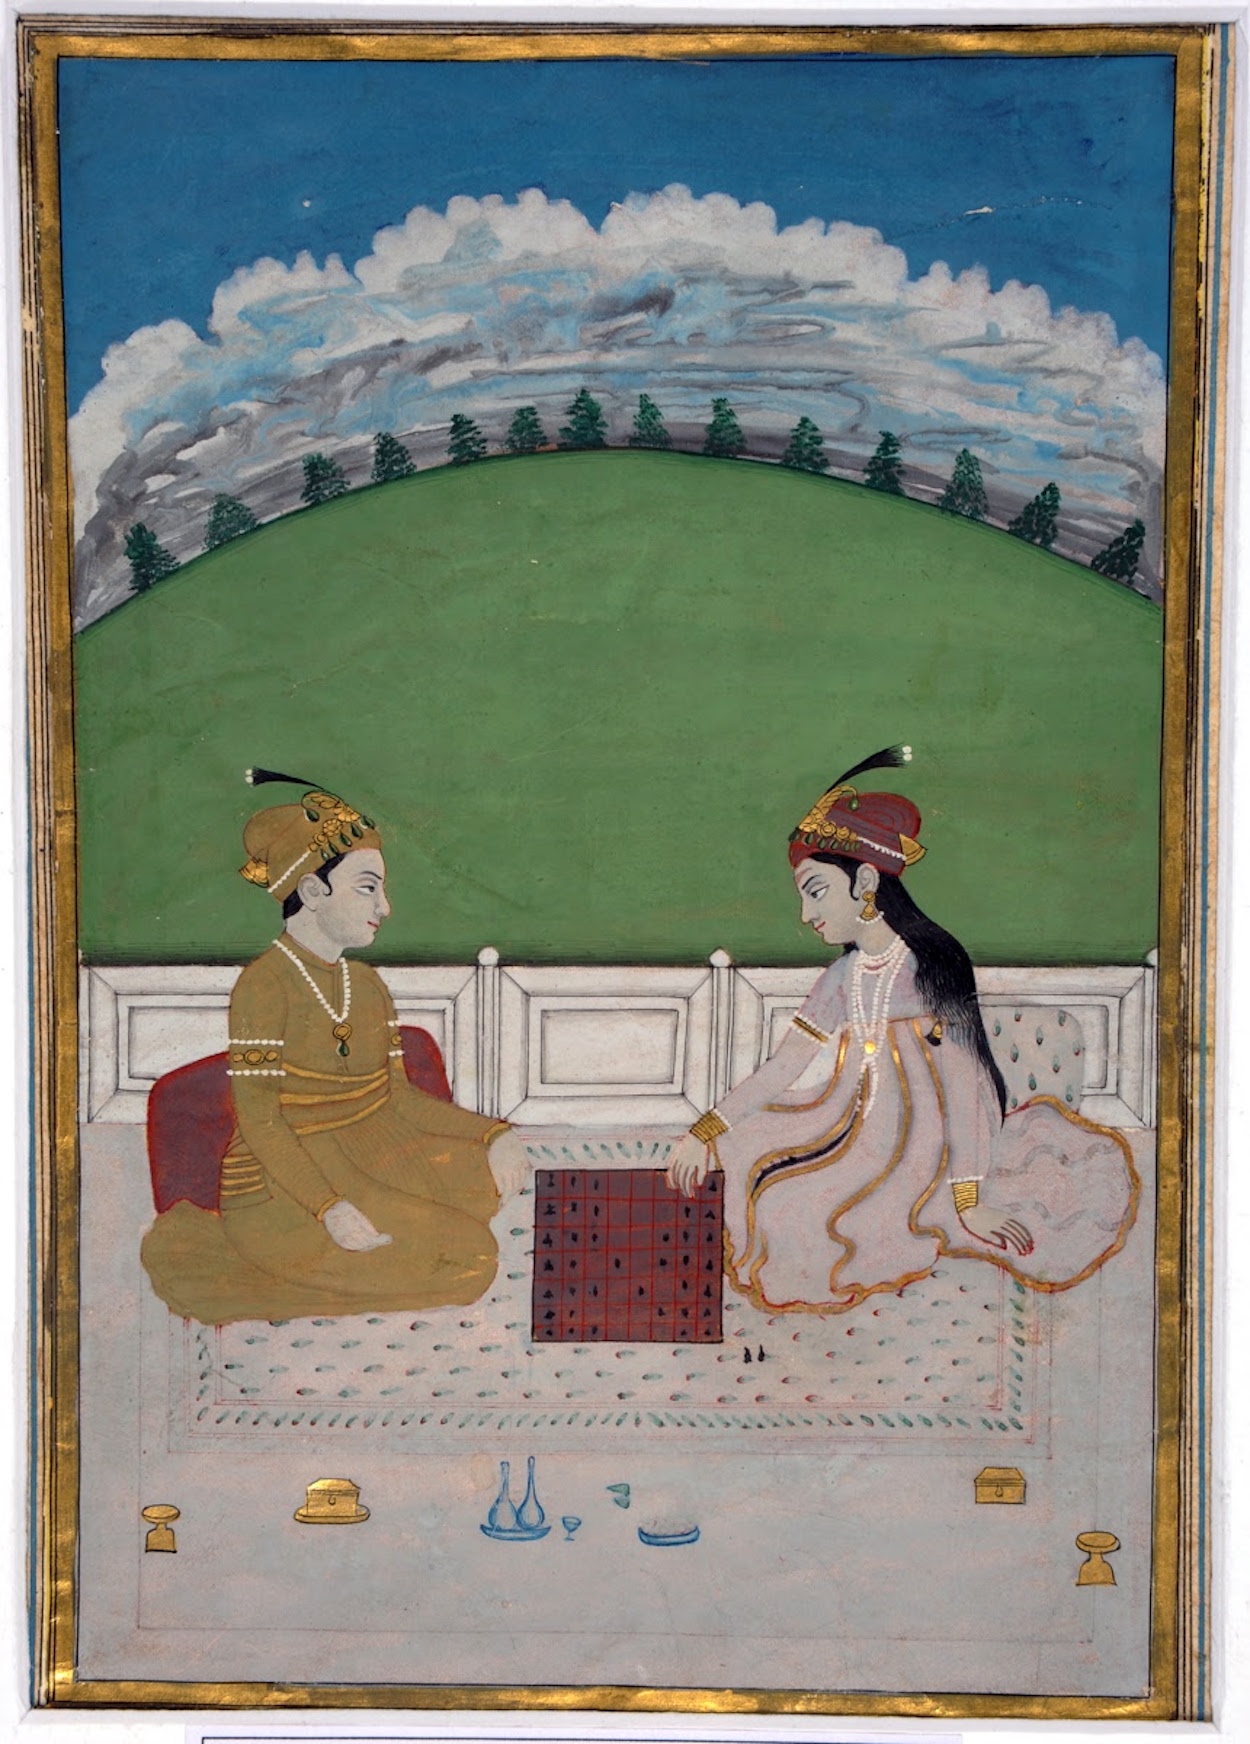 Prince and Princess Playing Chess by Unknown Artist - 19th century - 11.2 x 16.5 cm Salar Jung Museum